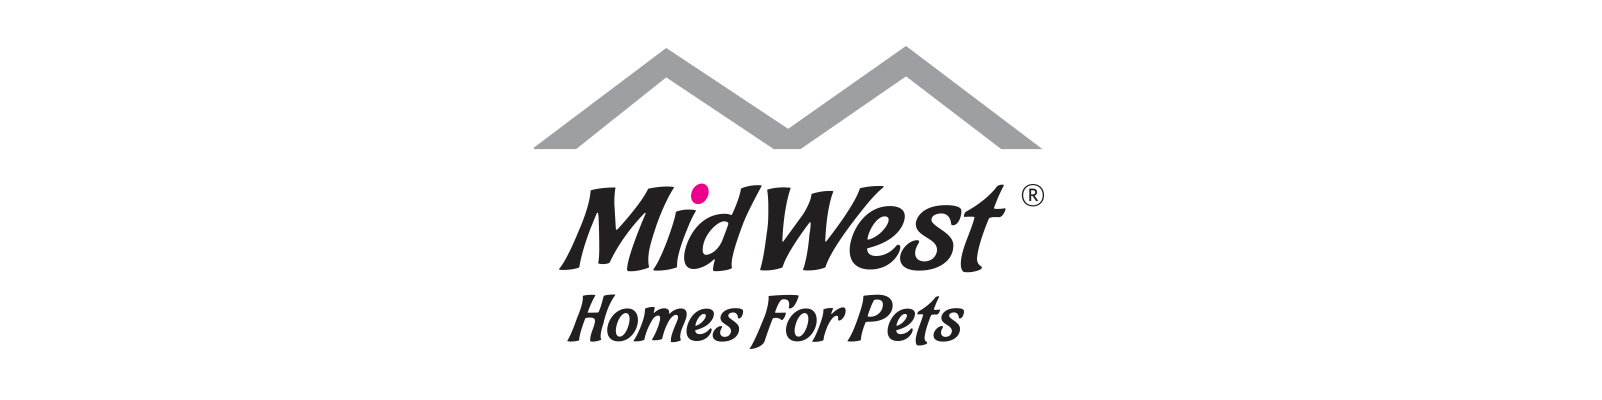 Midwest Homes For Pets